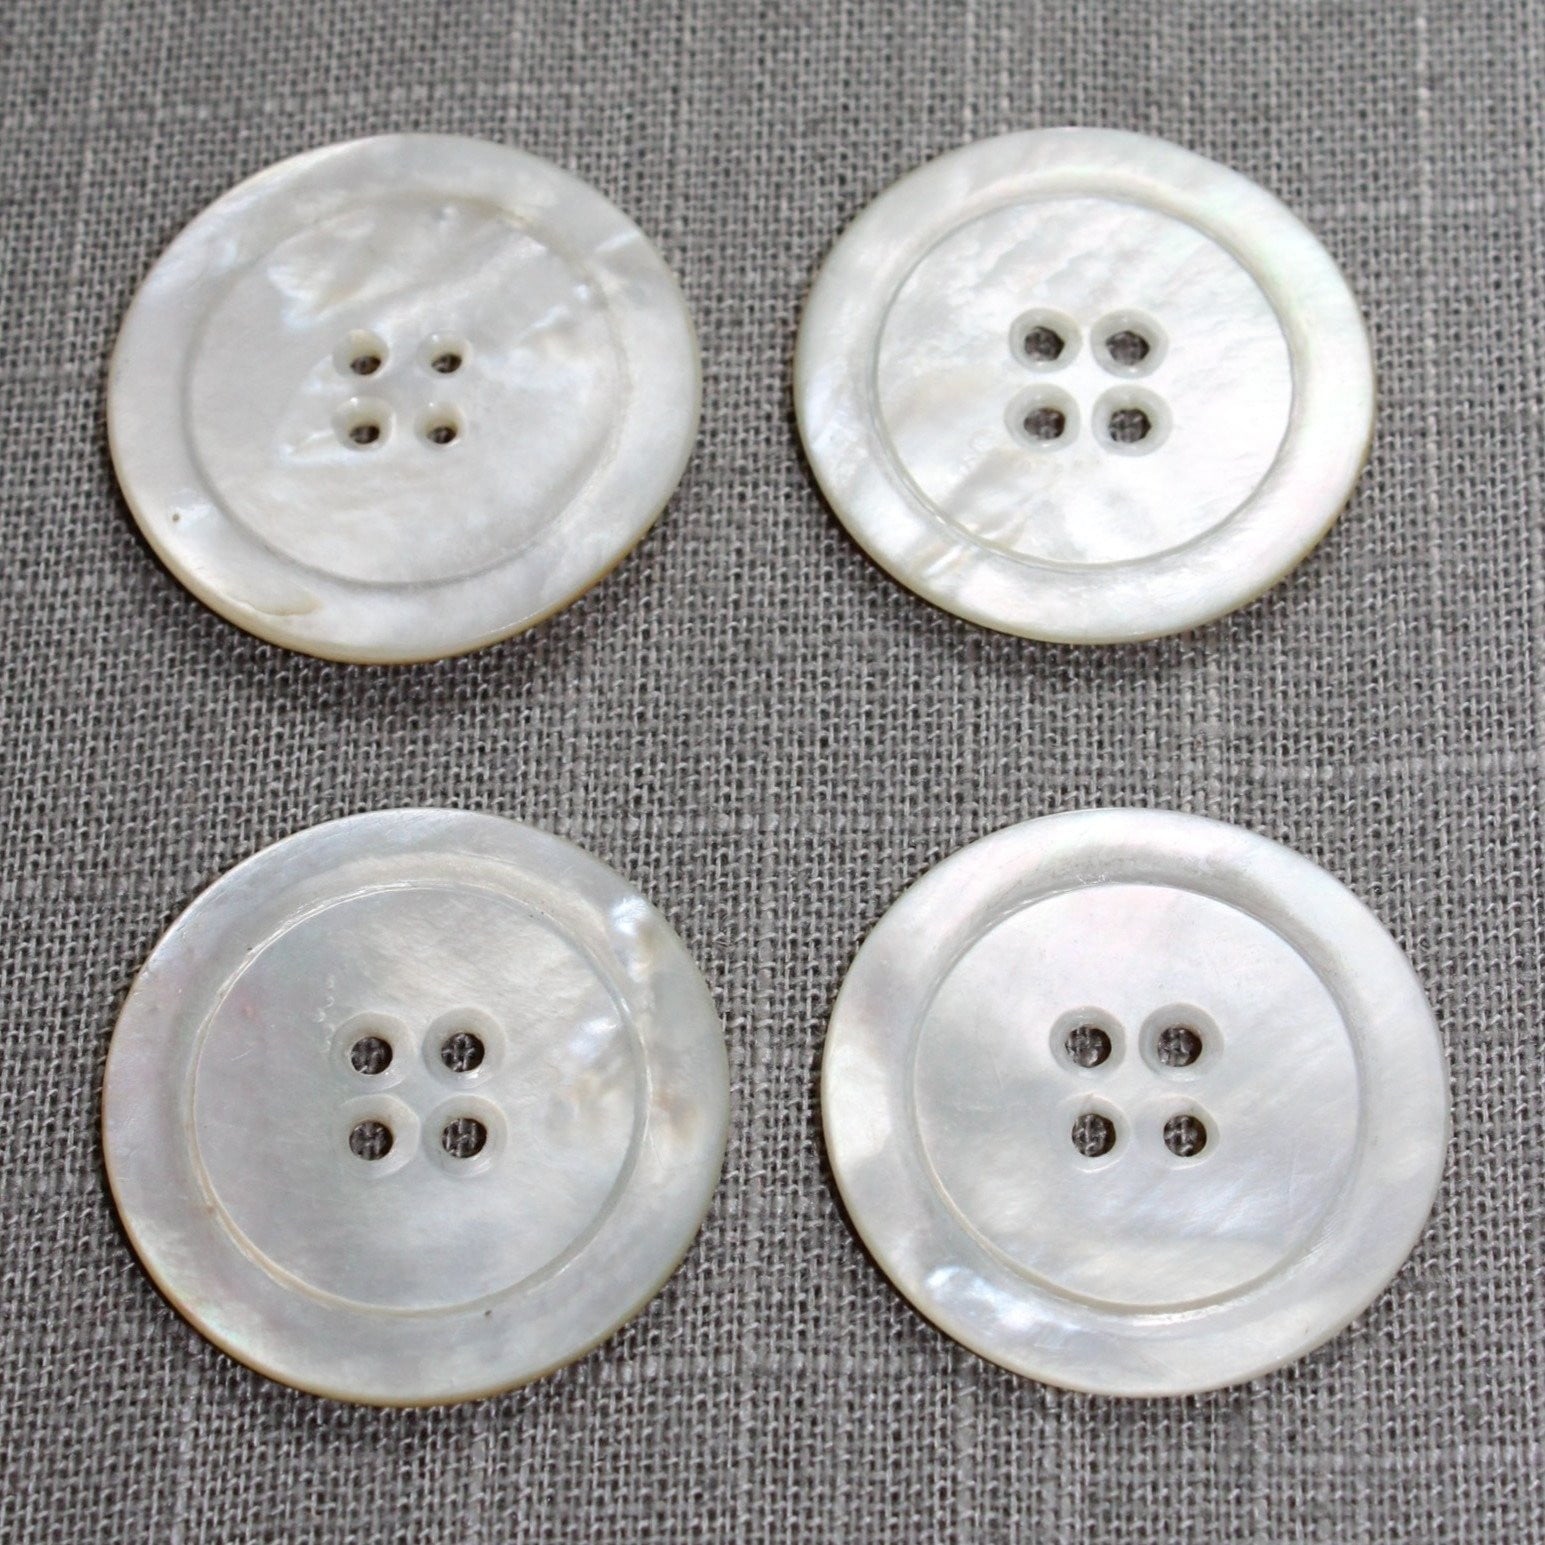  Large White Buttons